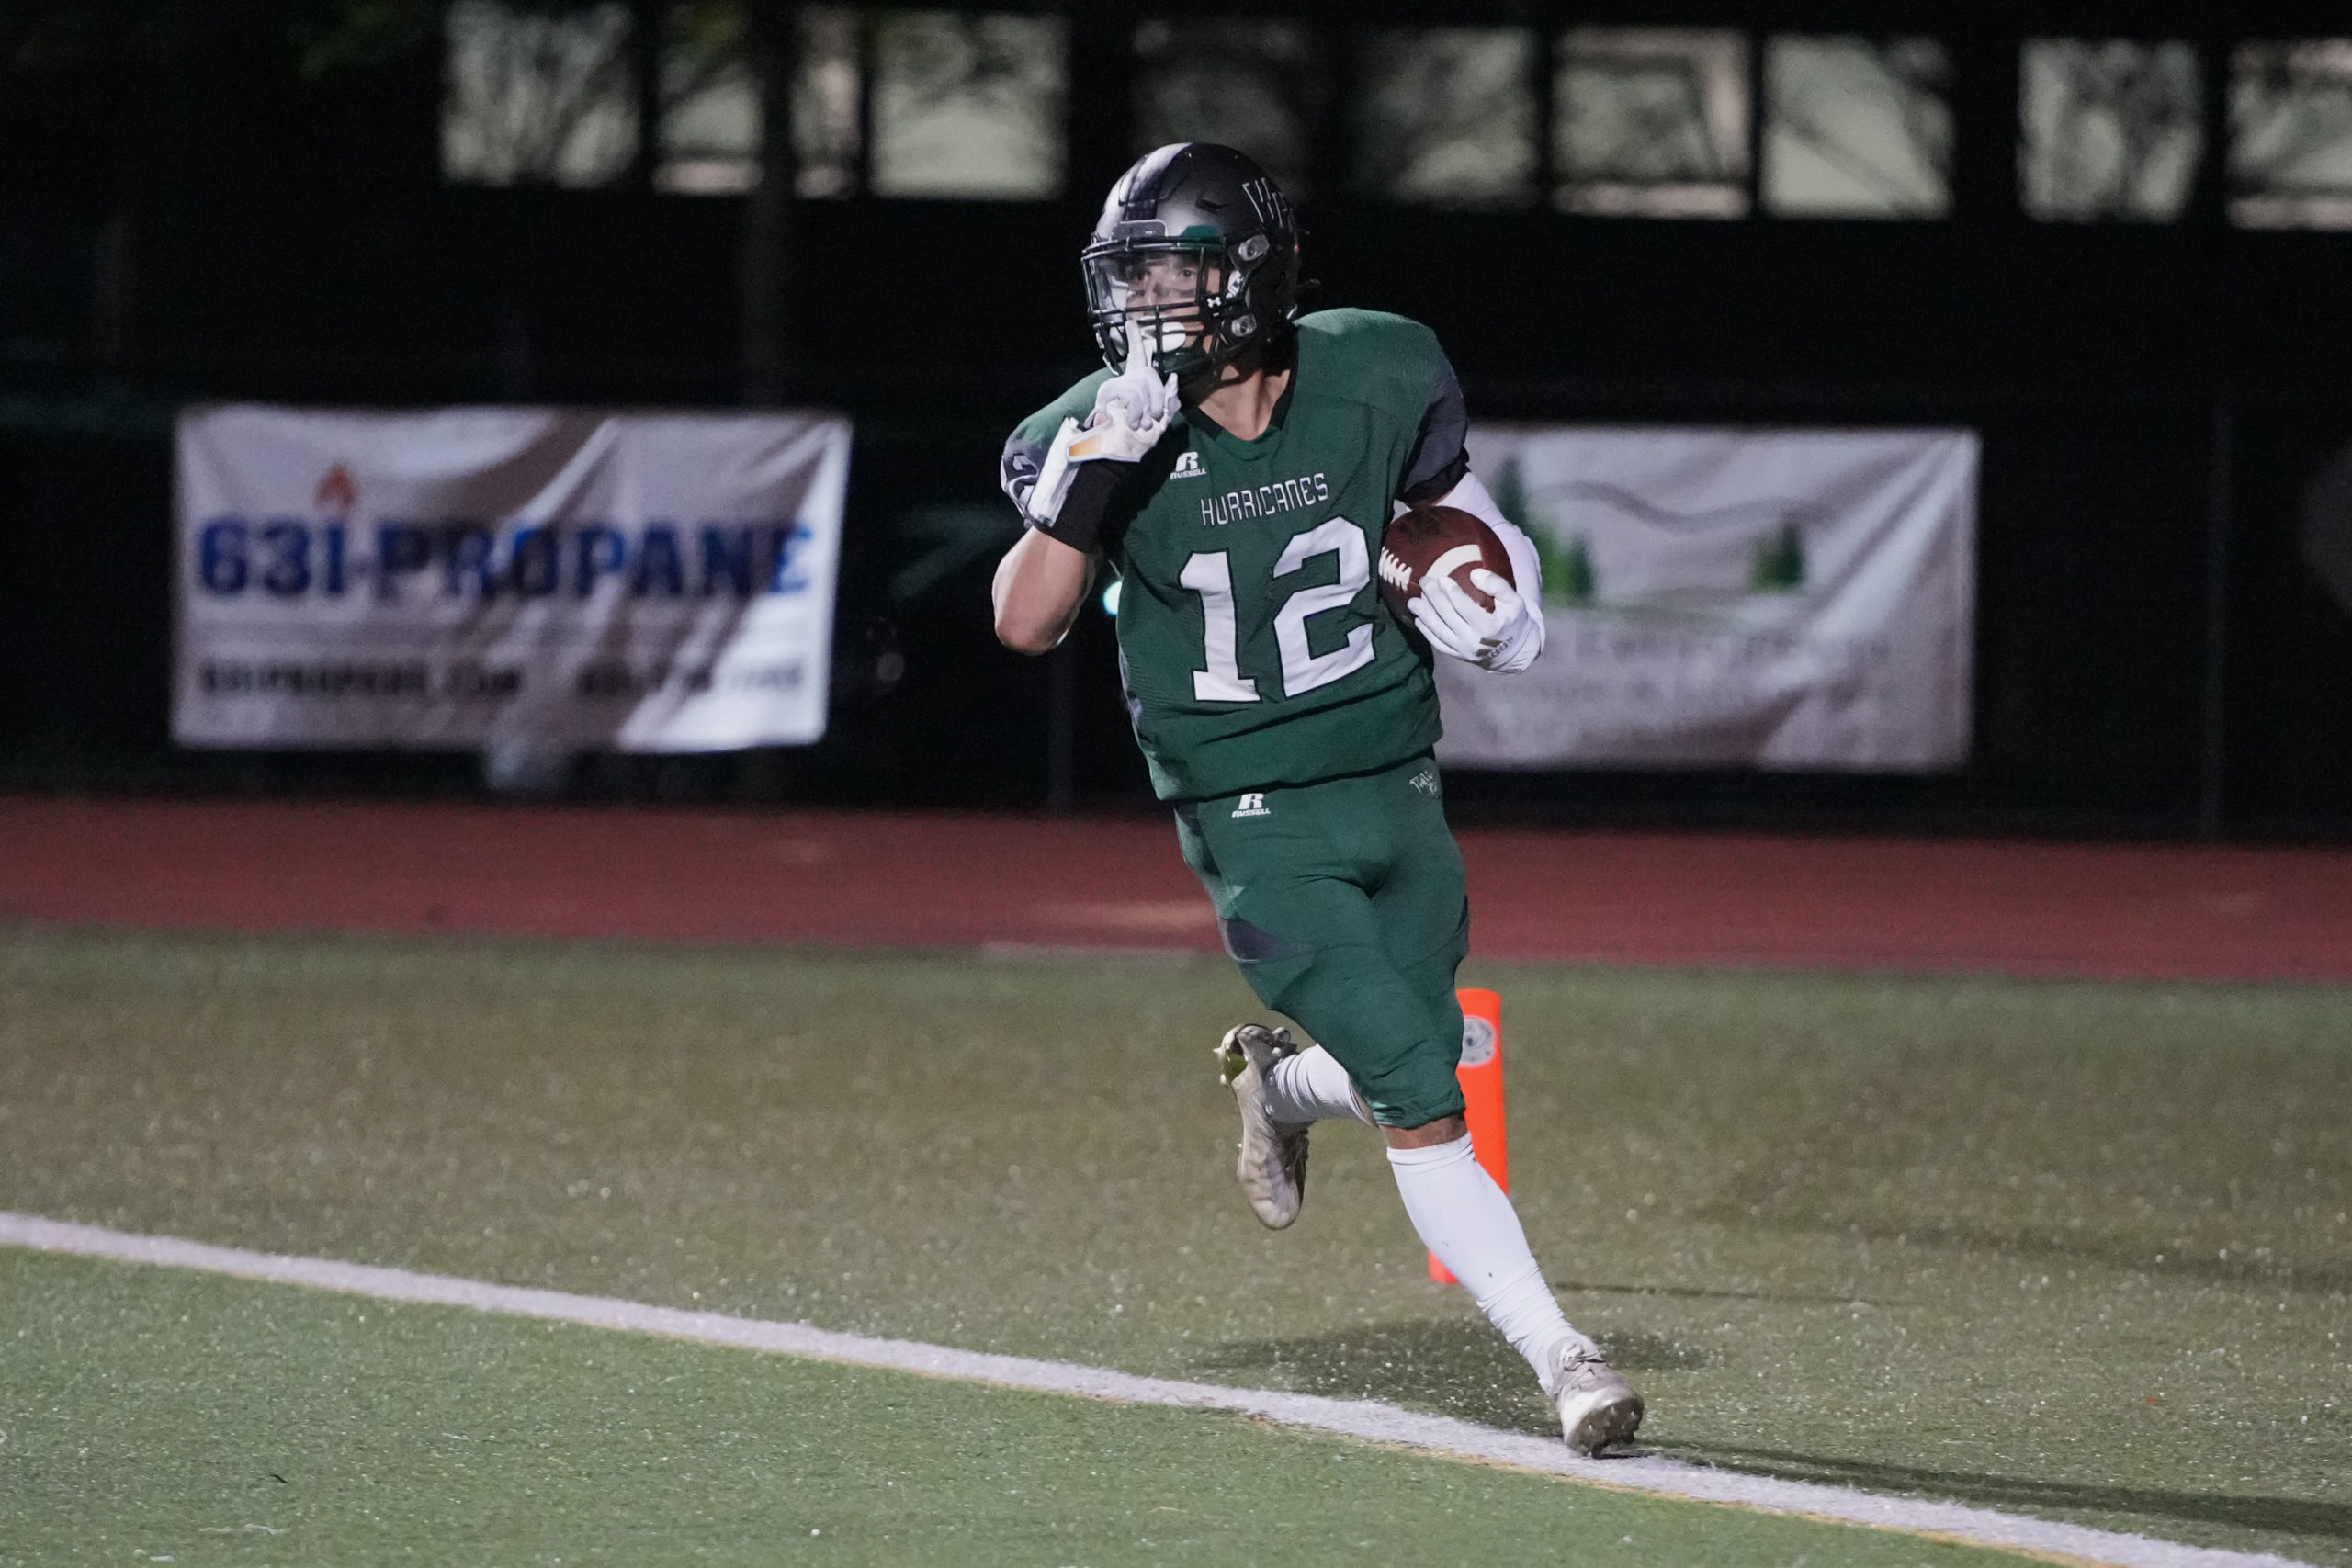 Deegan Laube's 14-yard touchdown reception from quarterback Will Gambino made it a 30-9 game in favor of the Hurricanes, who went on to win 35-9 over Comsewogue.